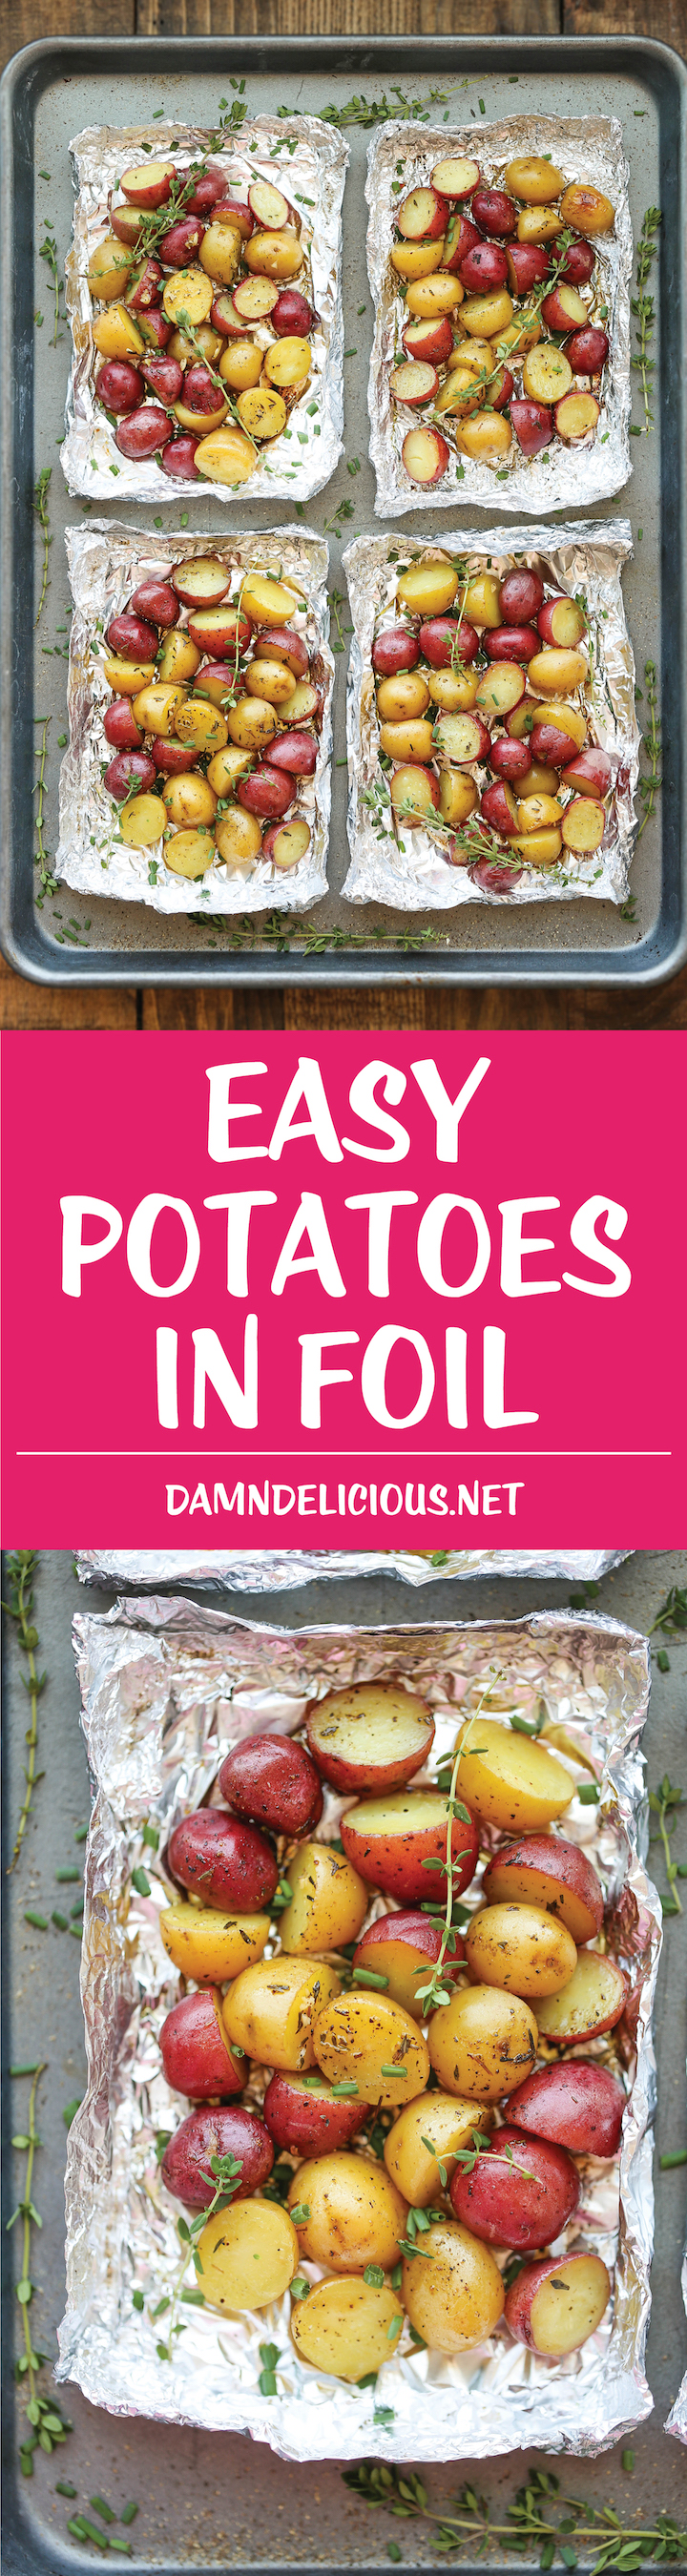 Easy Potatoes in Foil - You won't believe how easy it is to make potatoes right in foil - simply cut, wrap in foil and bake. Easy clean-up and just so good!